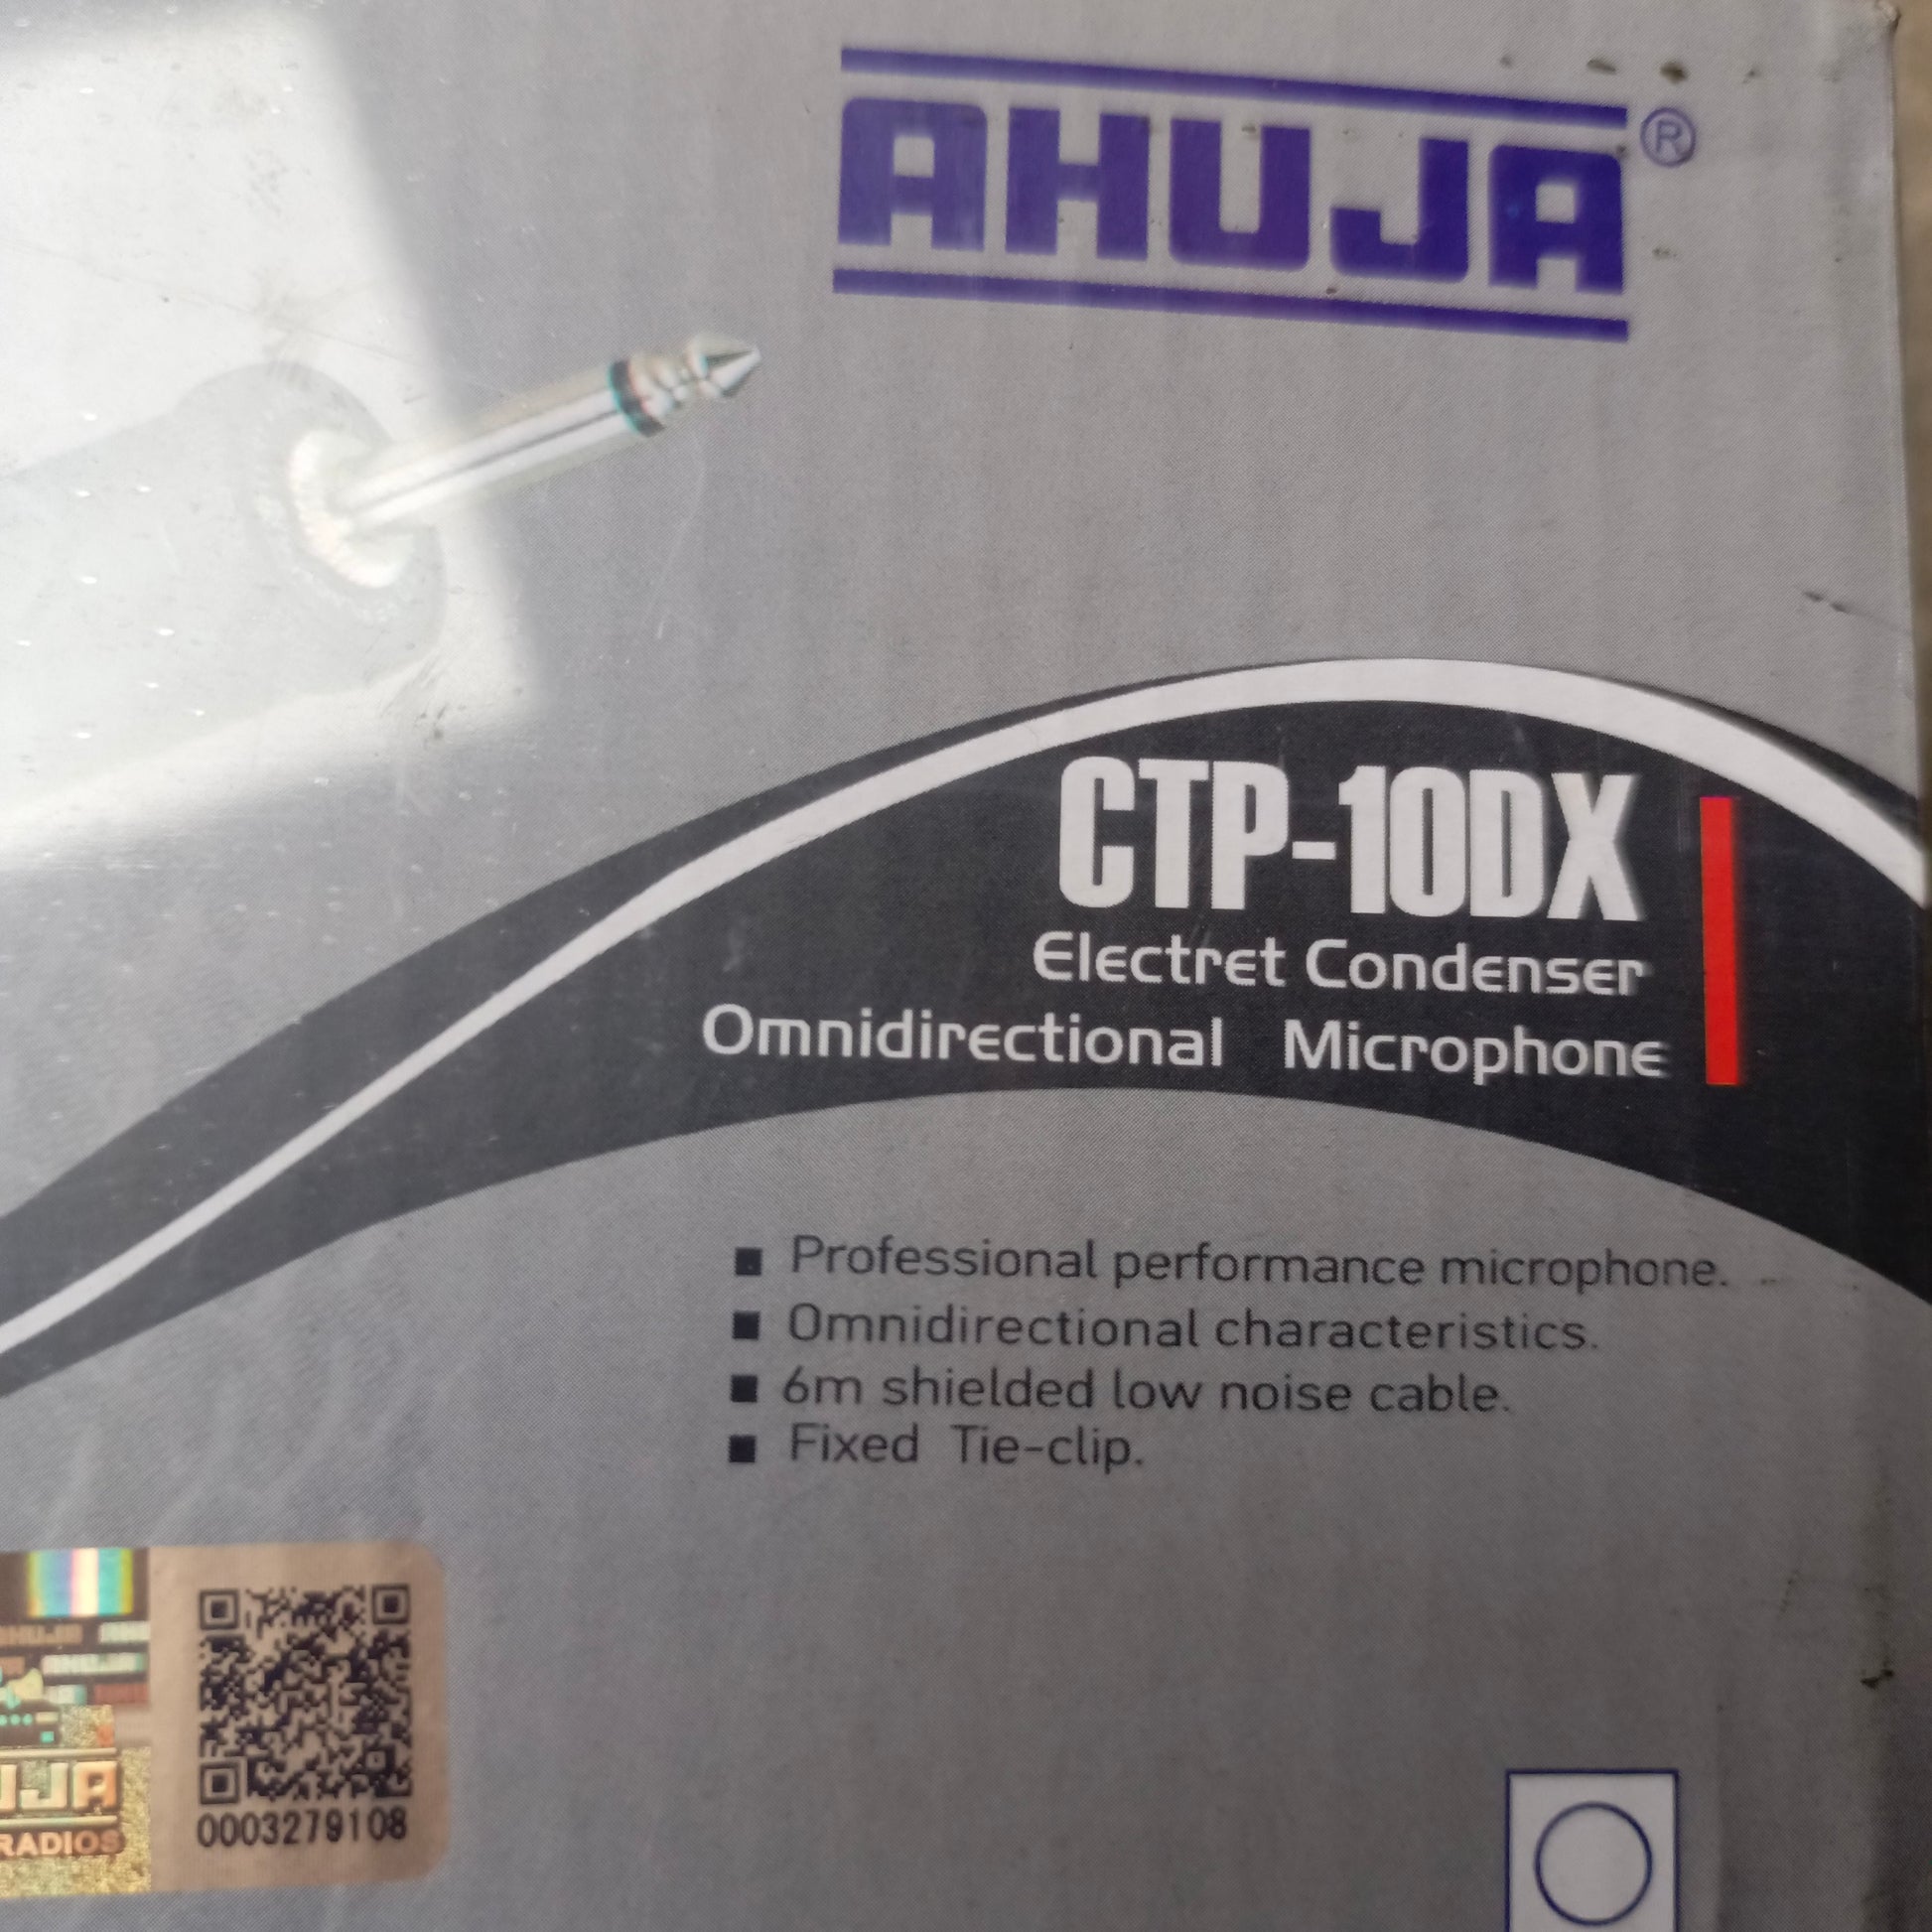 AHUJA CTP-10DX Electret Condenser Omnidirectional Microphone - Brand New